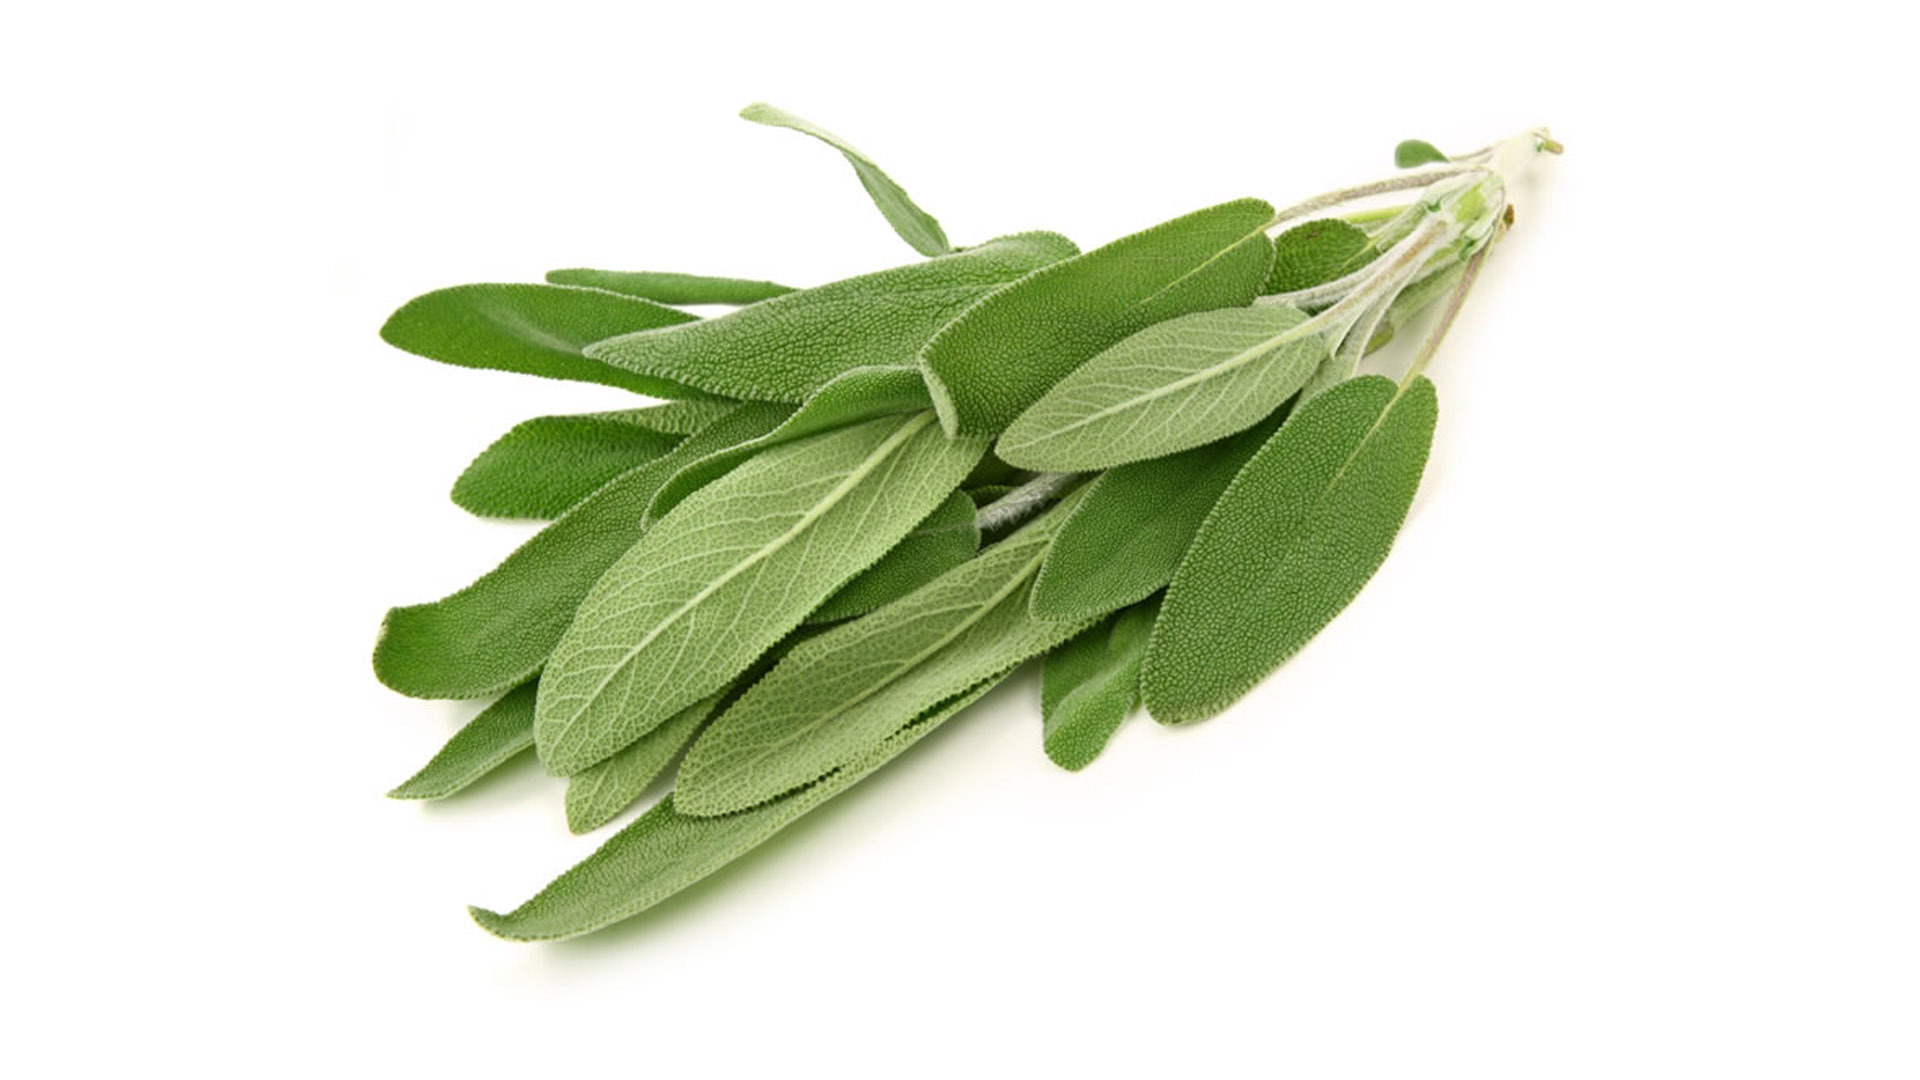 Maramyah is used as a sedative and can also heal skin wounds (MEE)